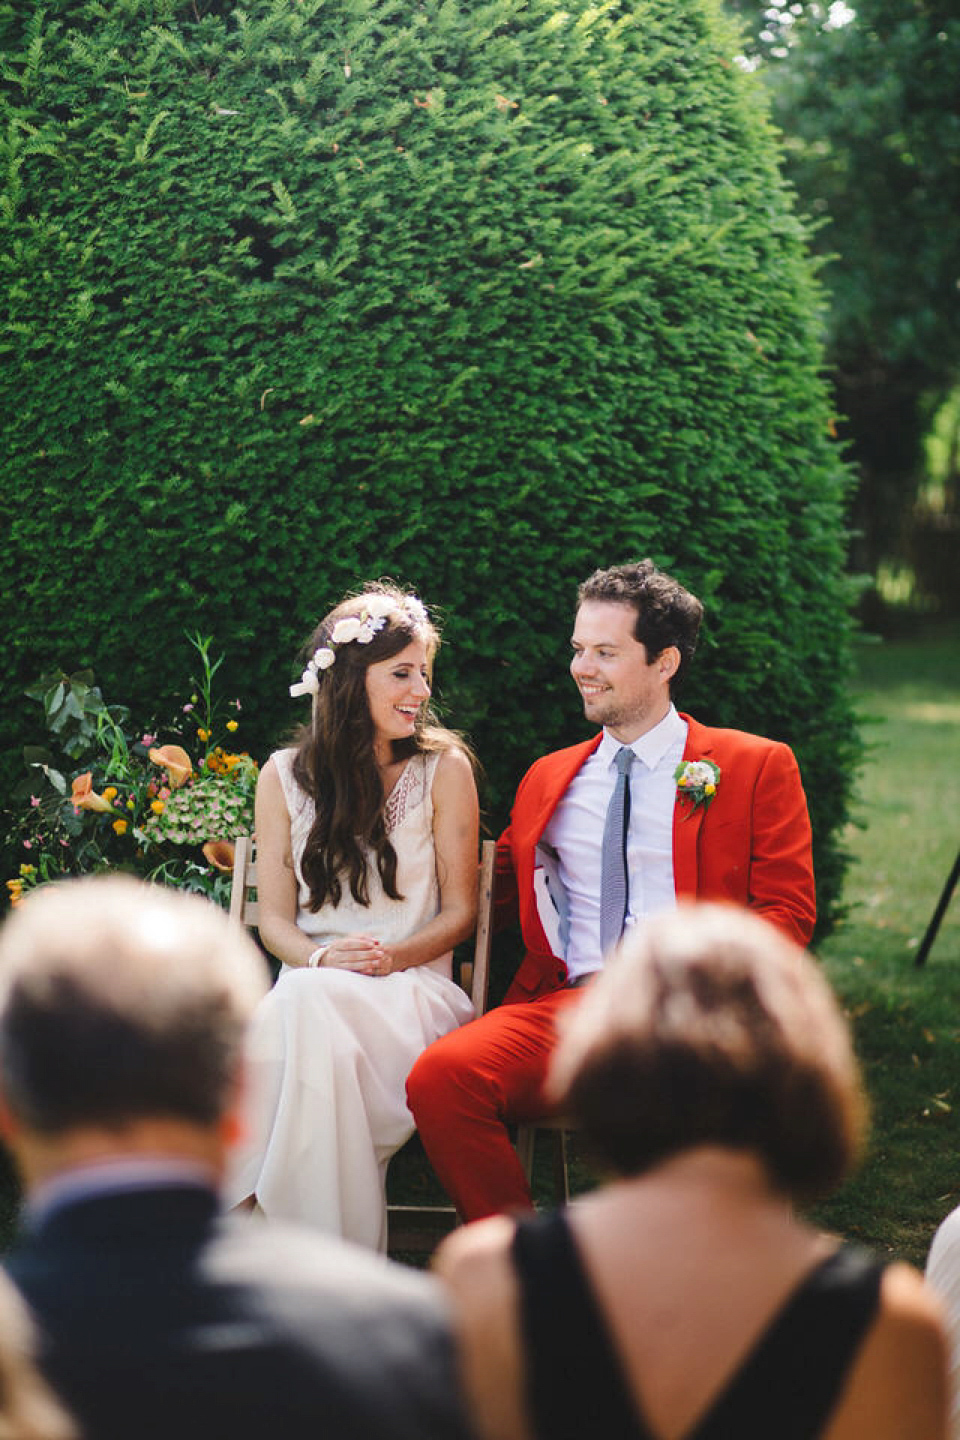 Emmanuelle wore a dress she designed herself for her chic and boho-luxe style French Chateau wedding. Photography by Joseph Hall.